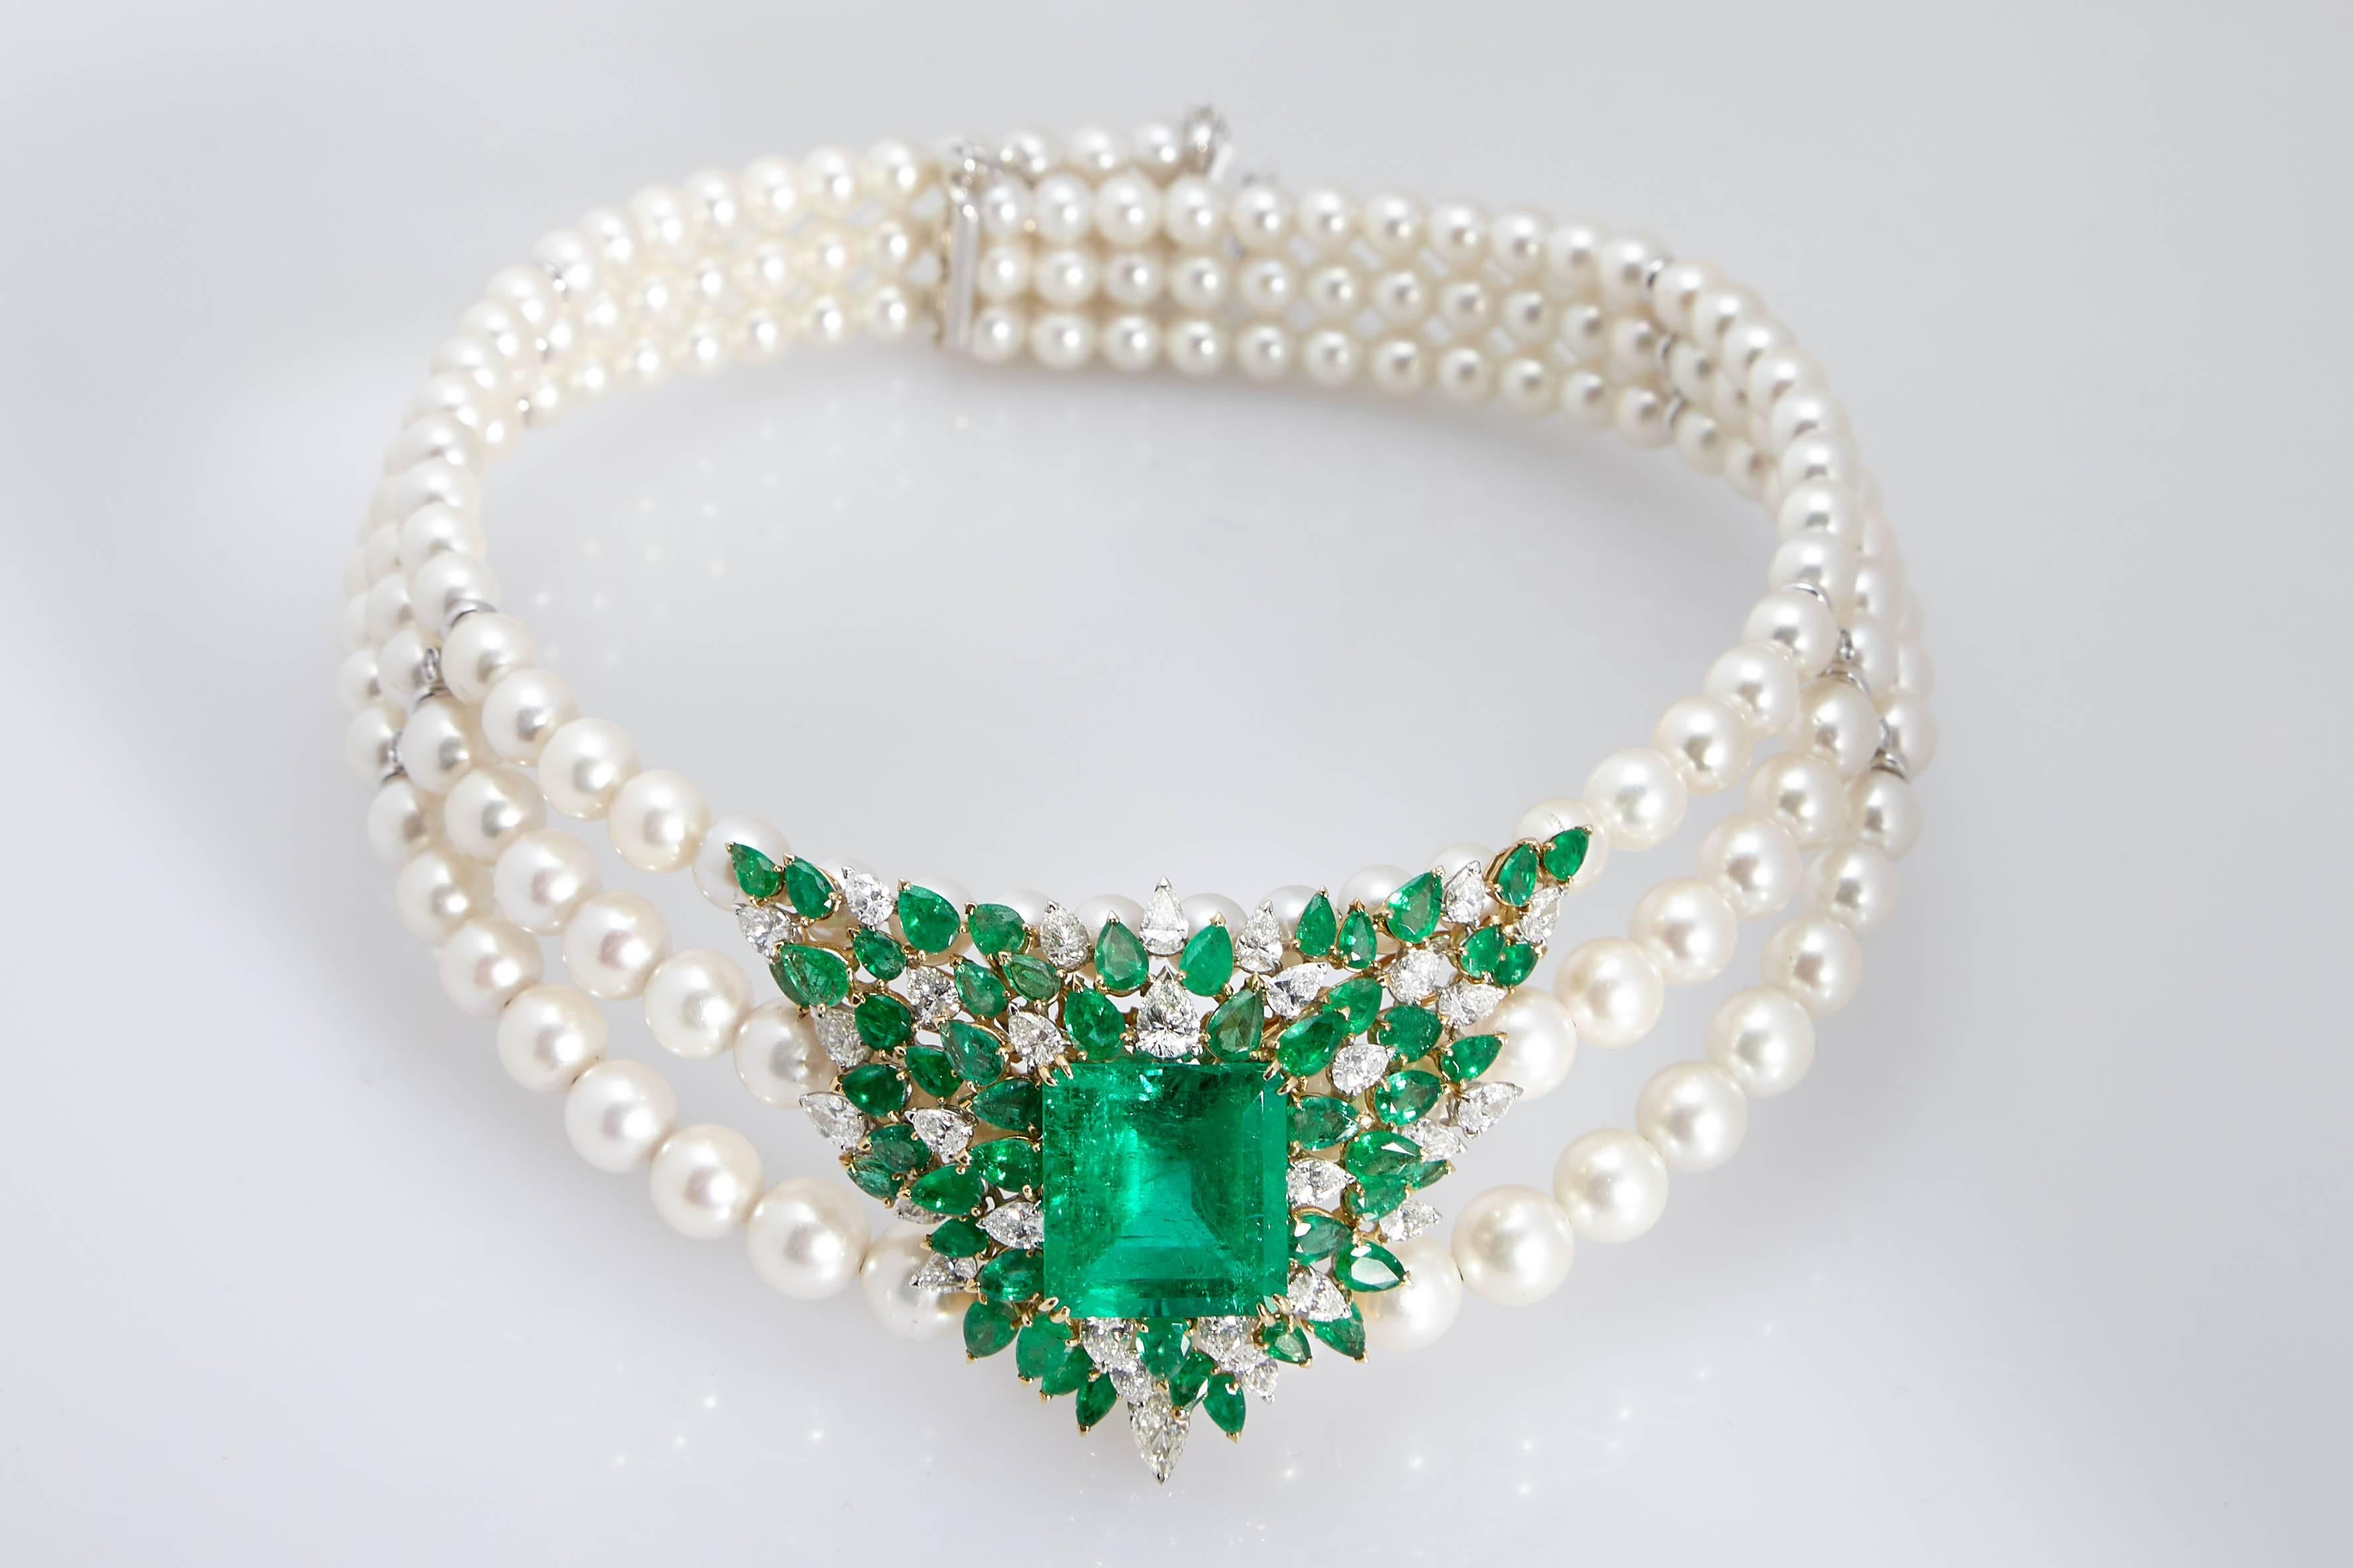 A of a kind collar necklace with three strands of fine pearls, diamonds (7 cts) and emeralds (25 cts center stone + 7cts the side stones Colombian emeralds; moderate oil, Cisgem certificate available). Mounted on 18kt white gold. Made in Italy by